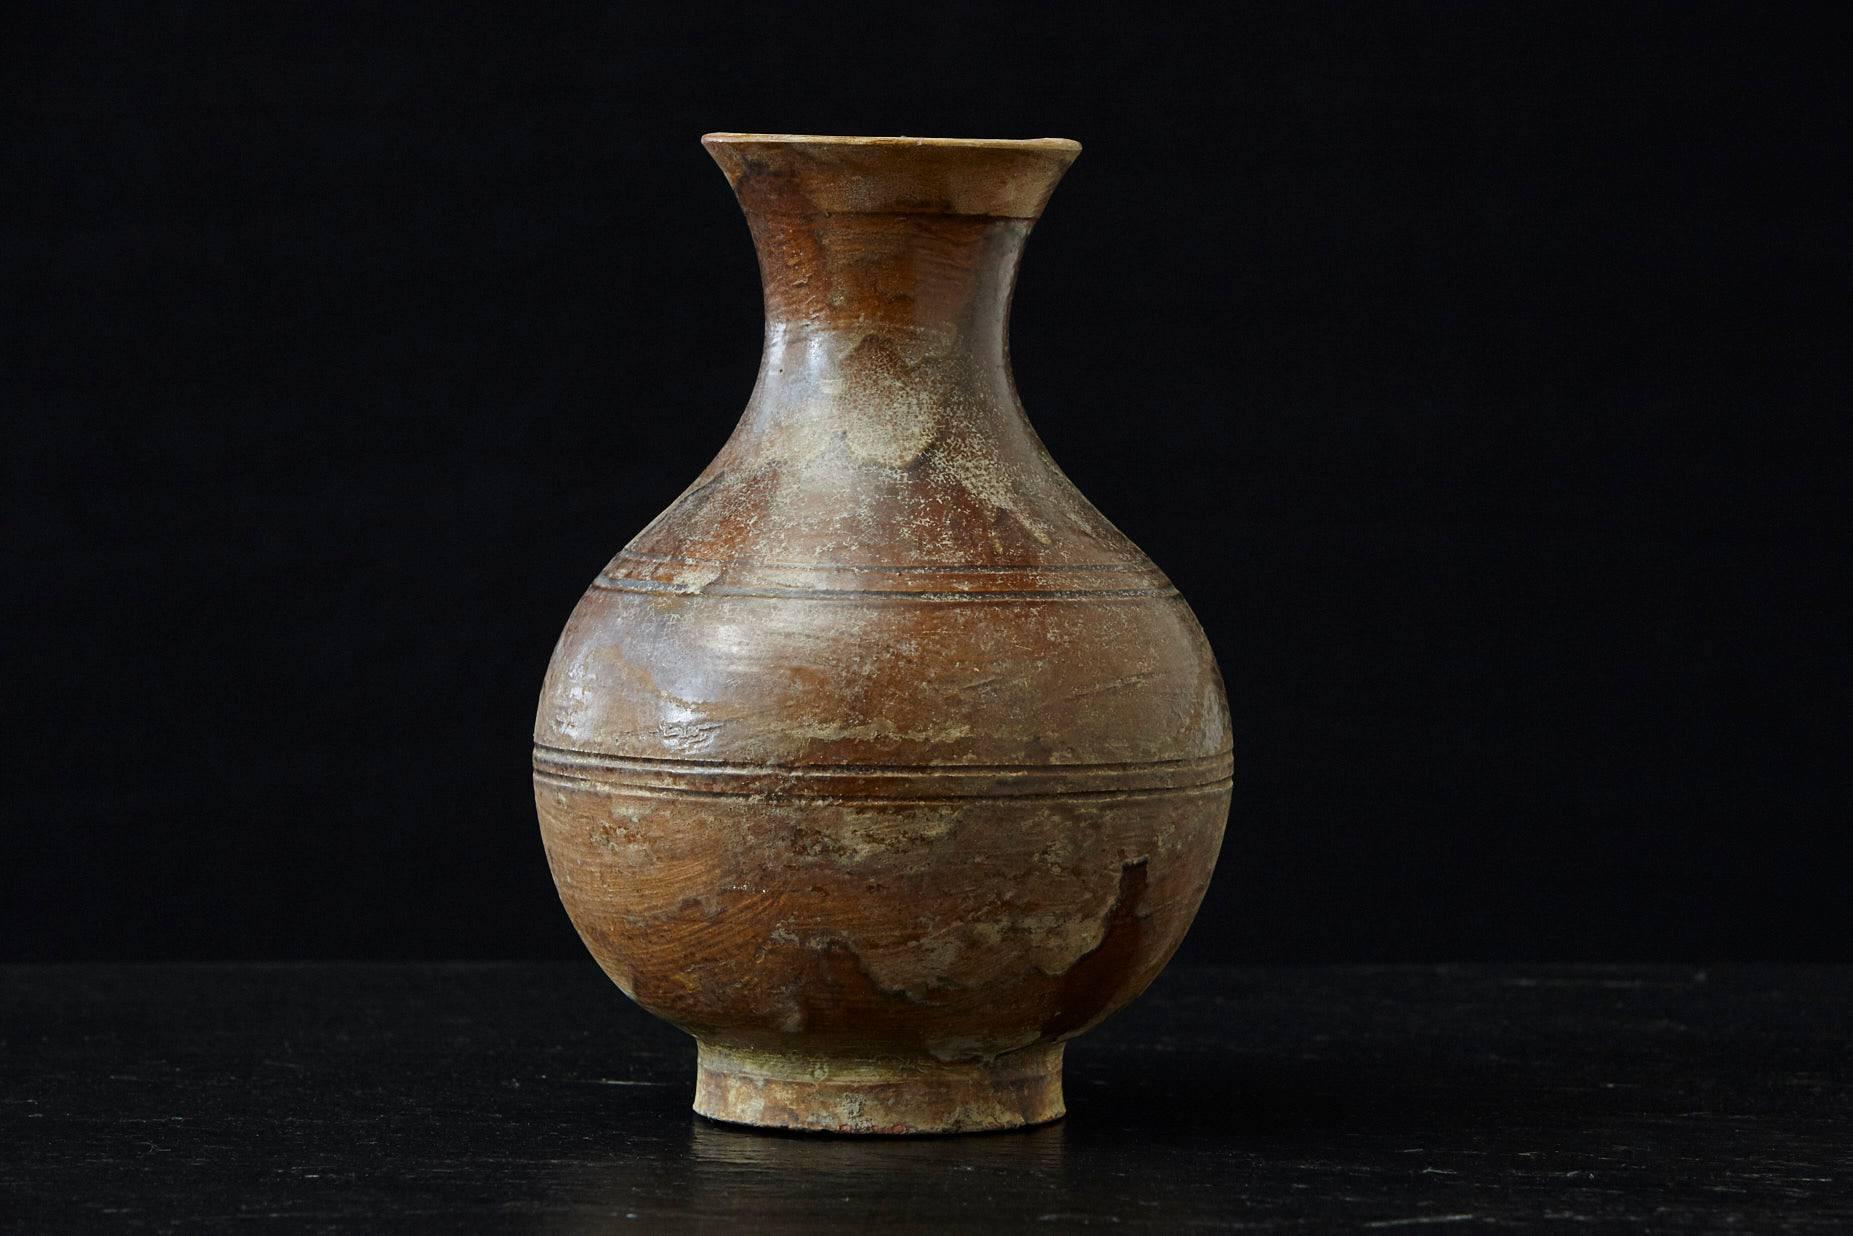 Rustic Antique Italian Terra Cotta Vase with Bottle Shape and Brown Glaze